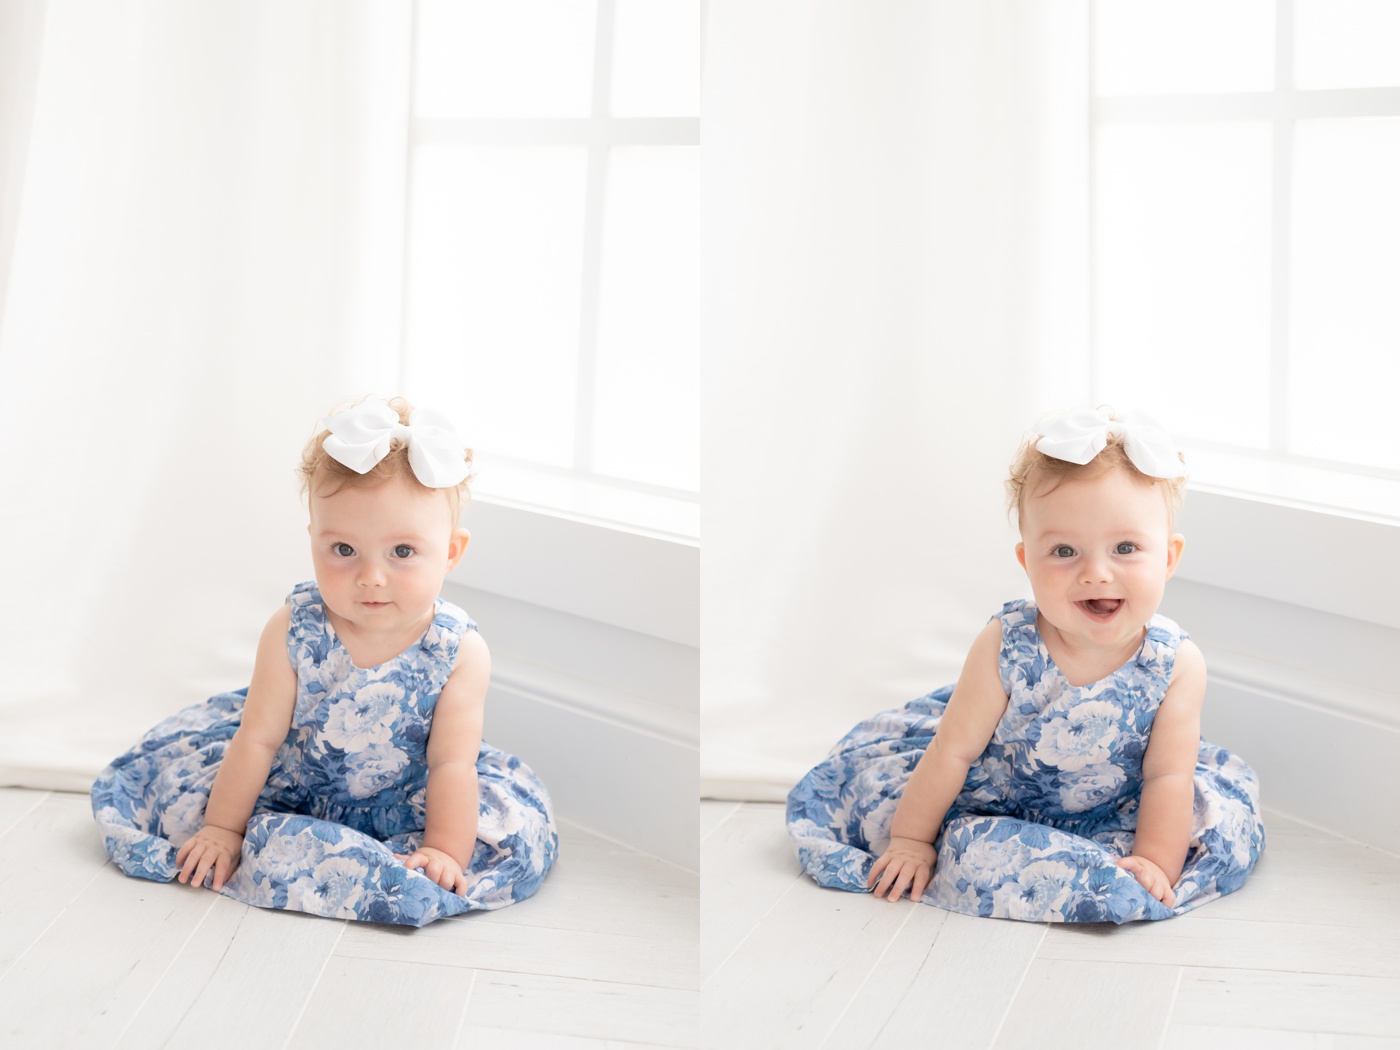 Baby girl sitting the floor of a white photography studio wearing a white and blue floral dress